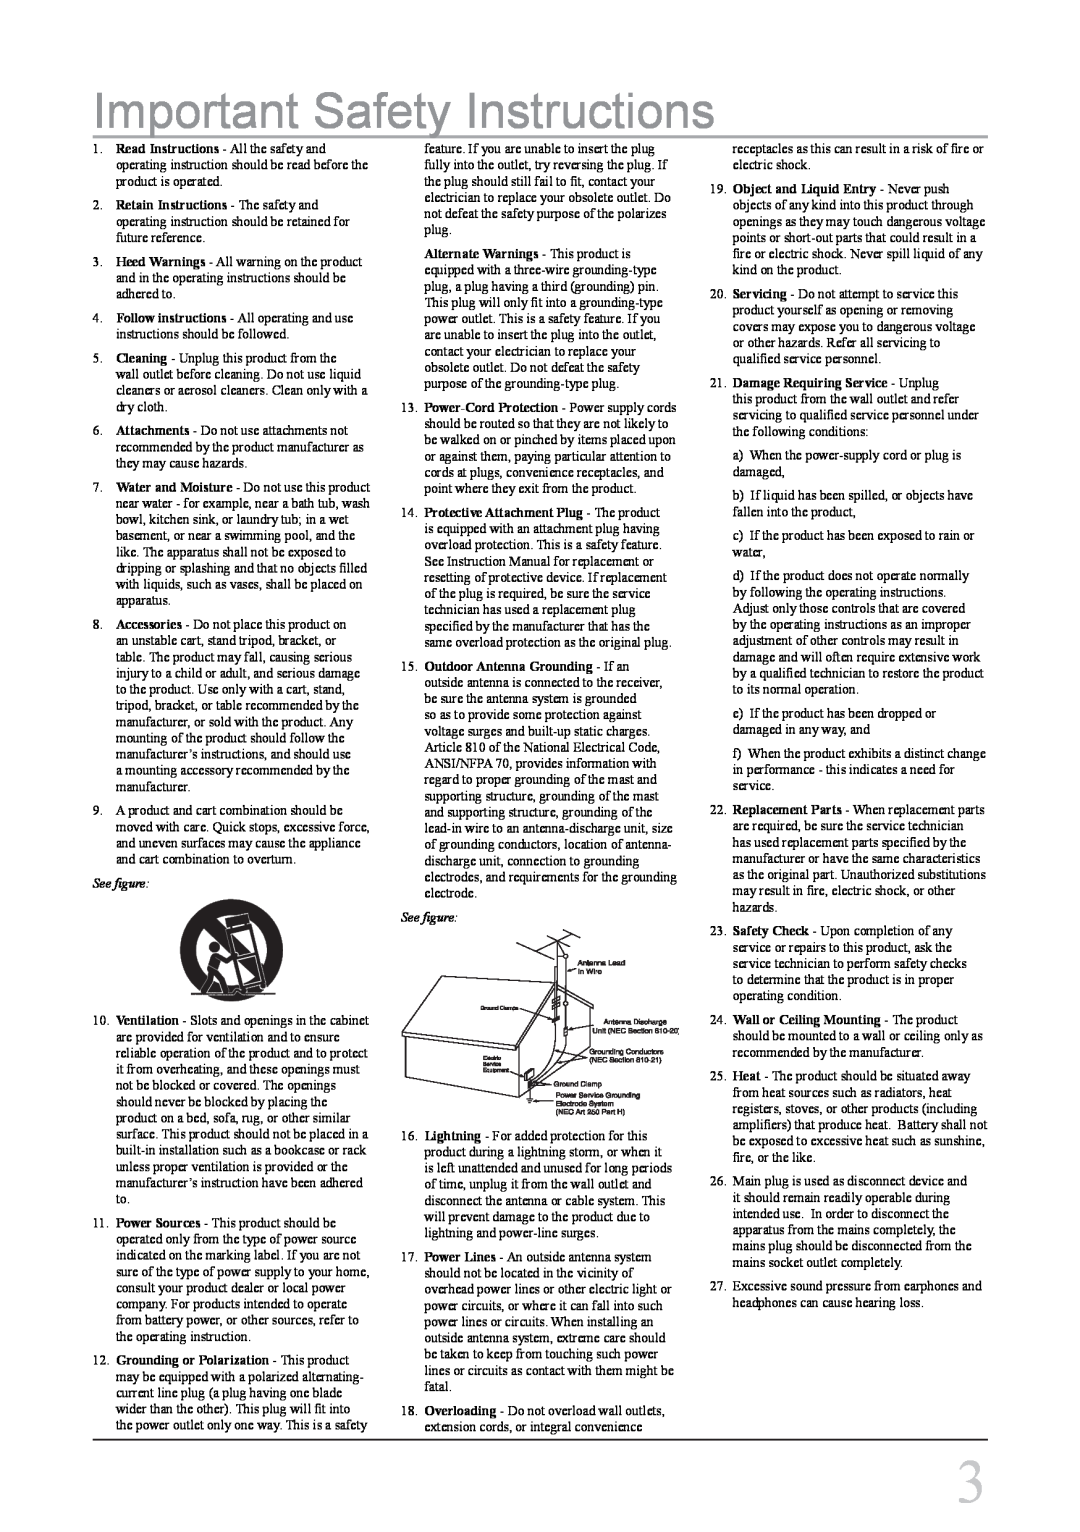 GPX HC208B instruction manual Important Safety Instructions, See figure 